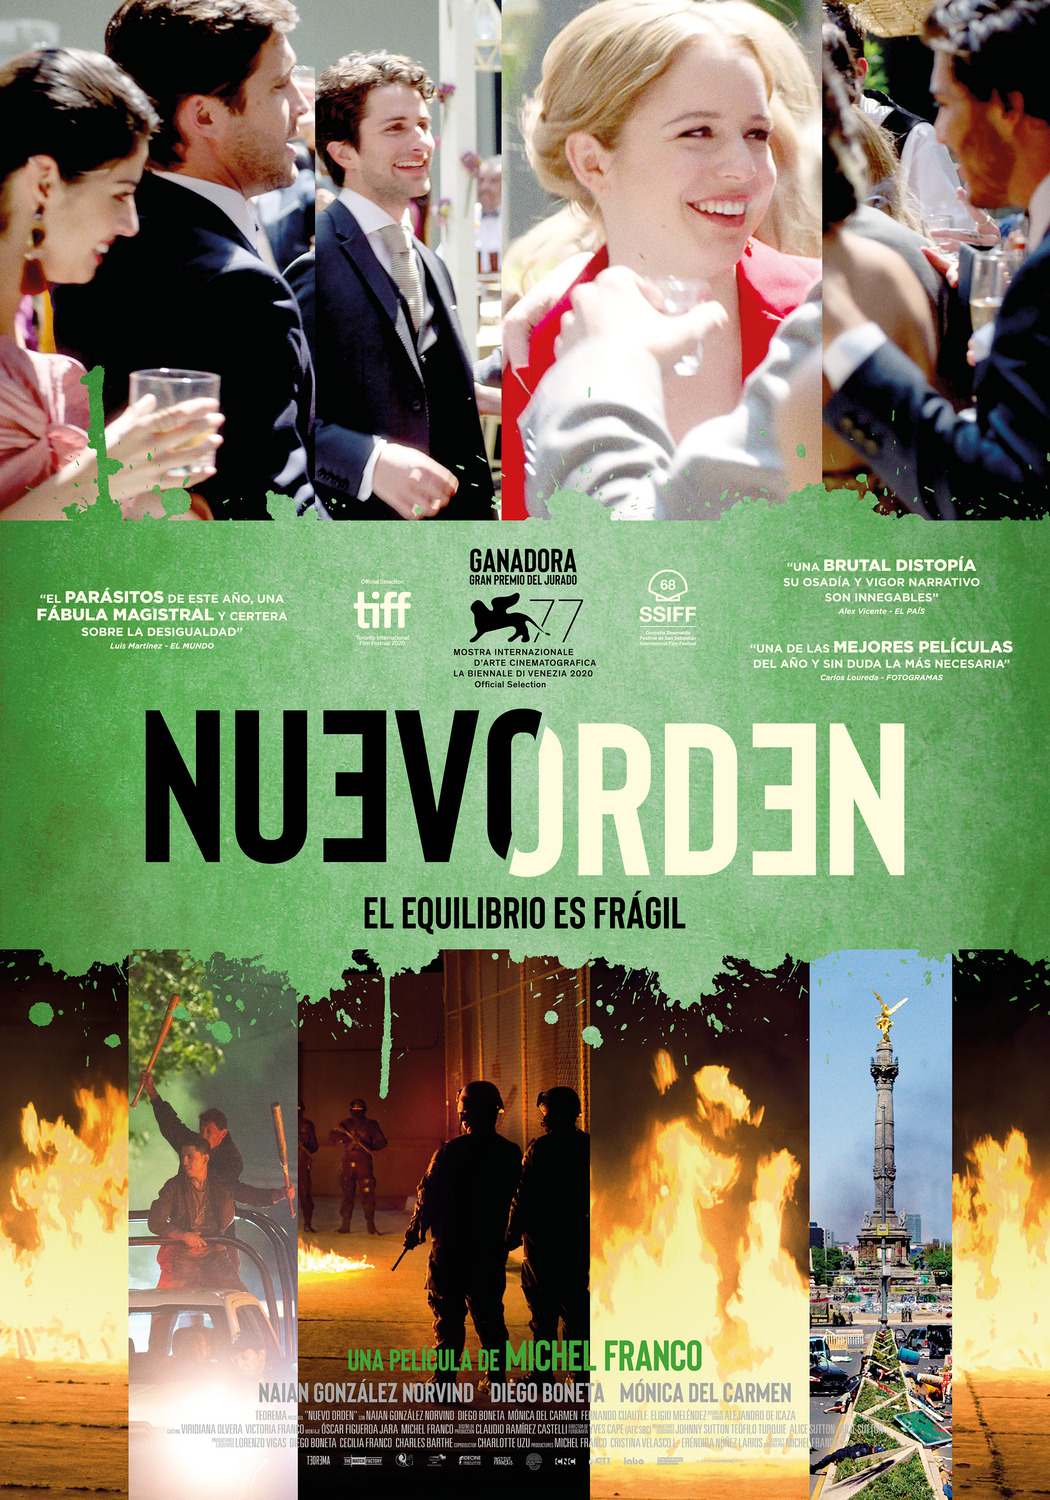 Extra Large Movie Poster Image for Nuevo orden (#2 of 3)